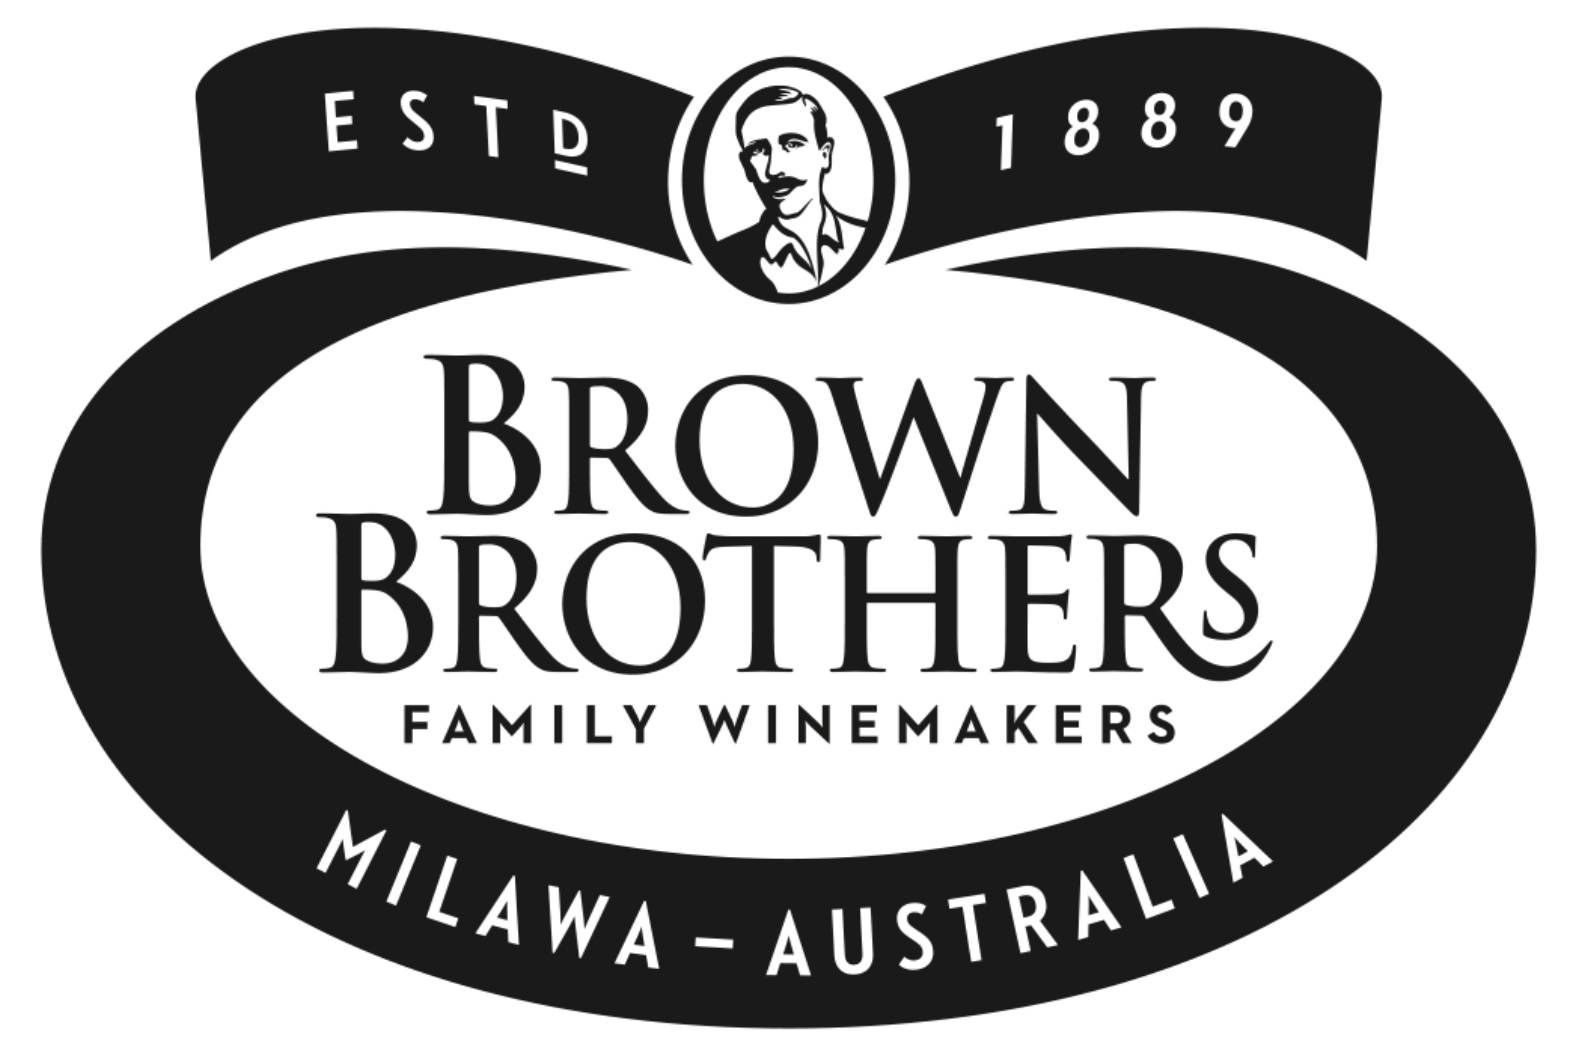 St.Brown Brothers